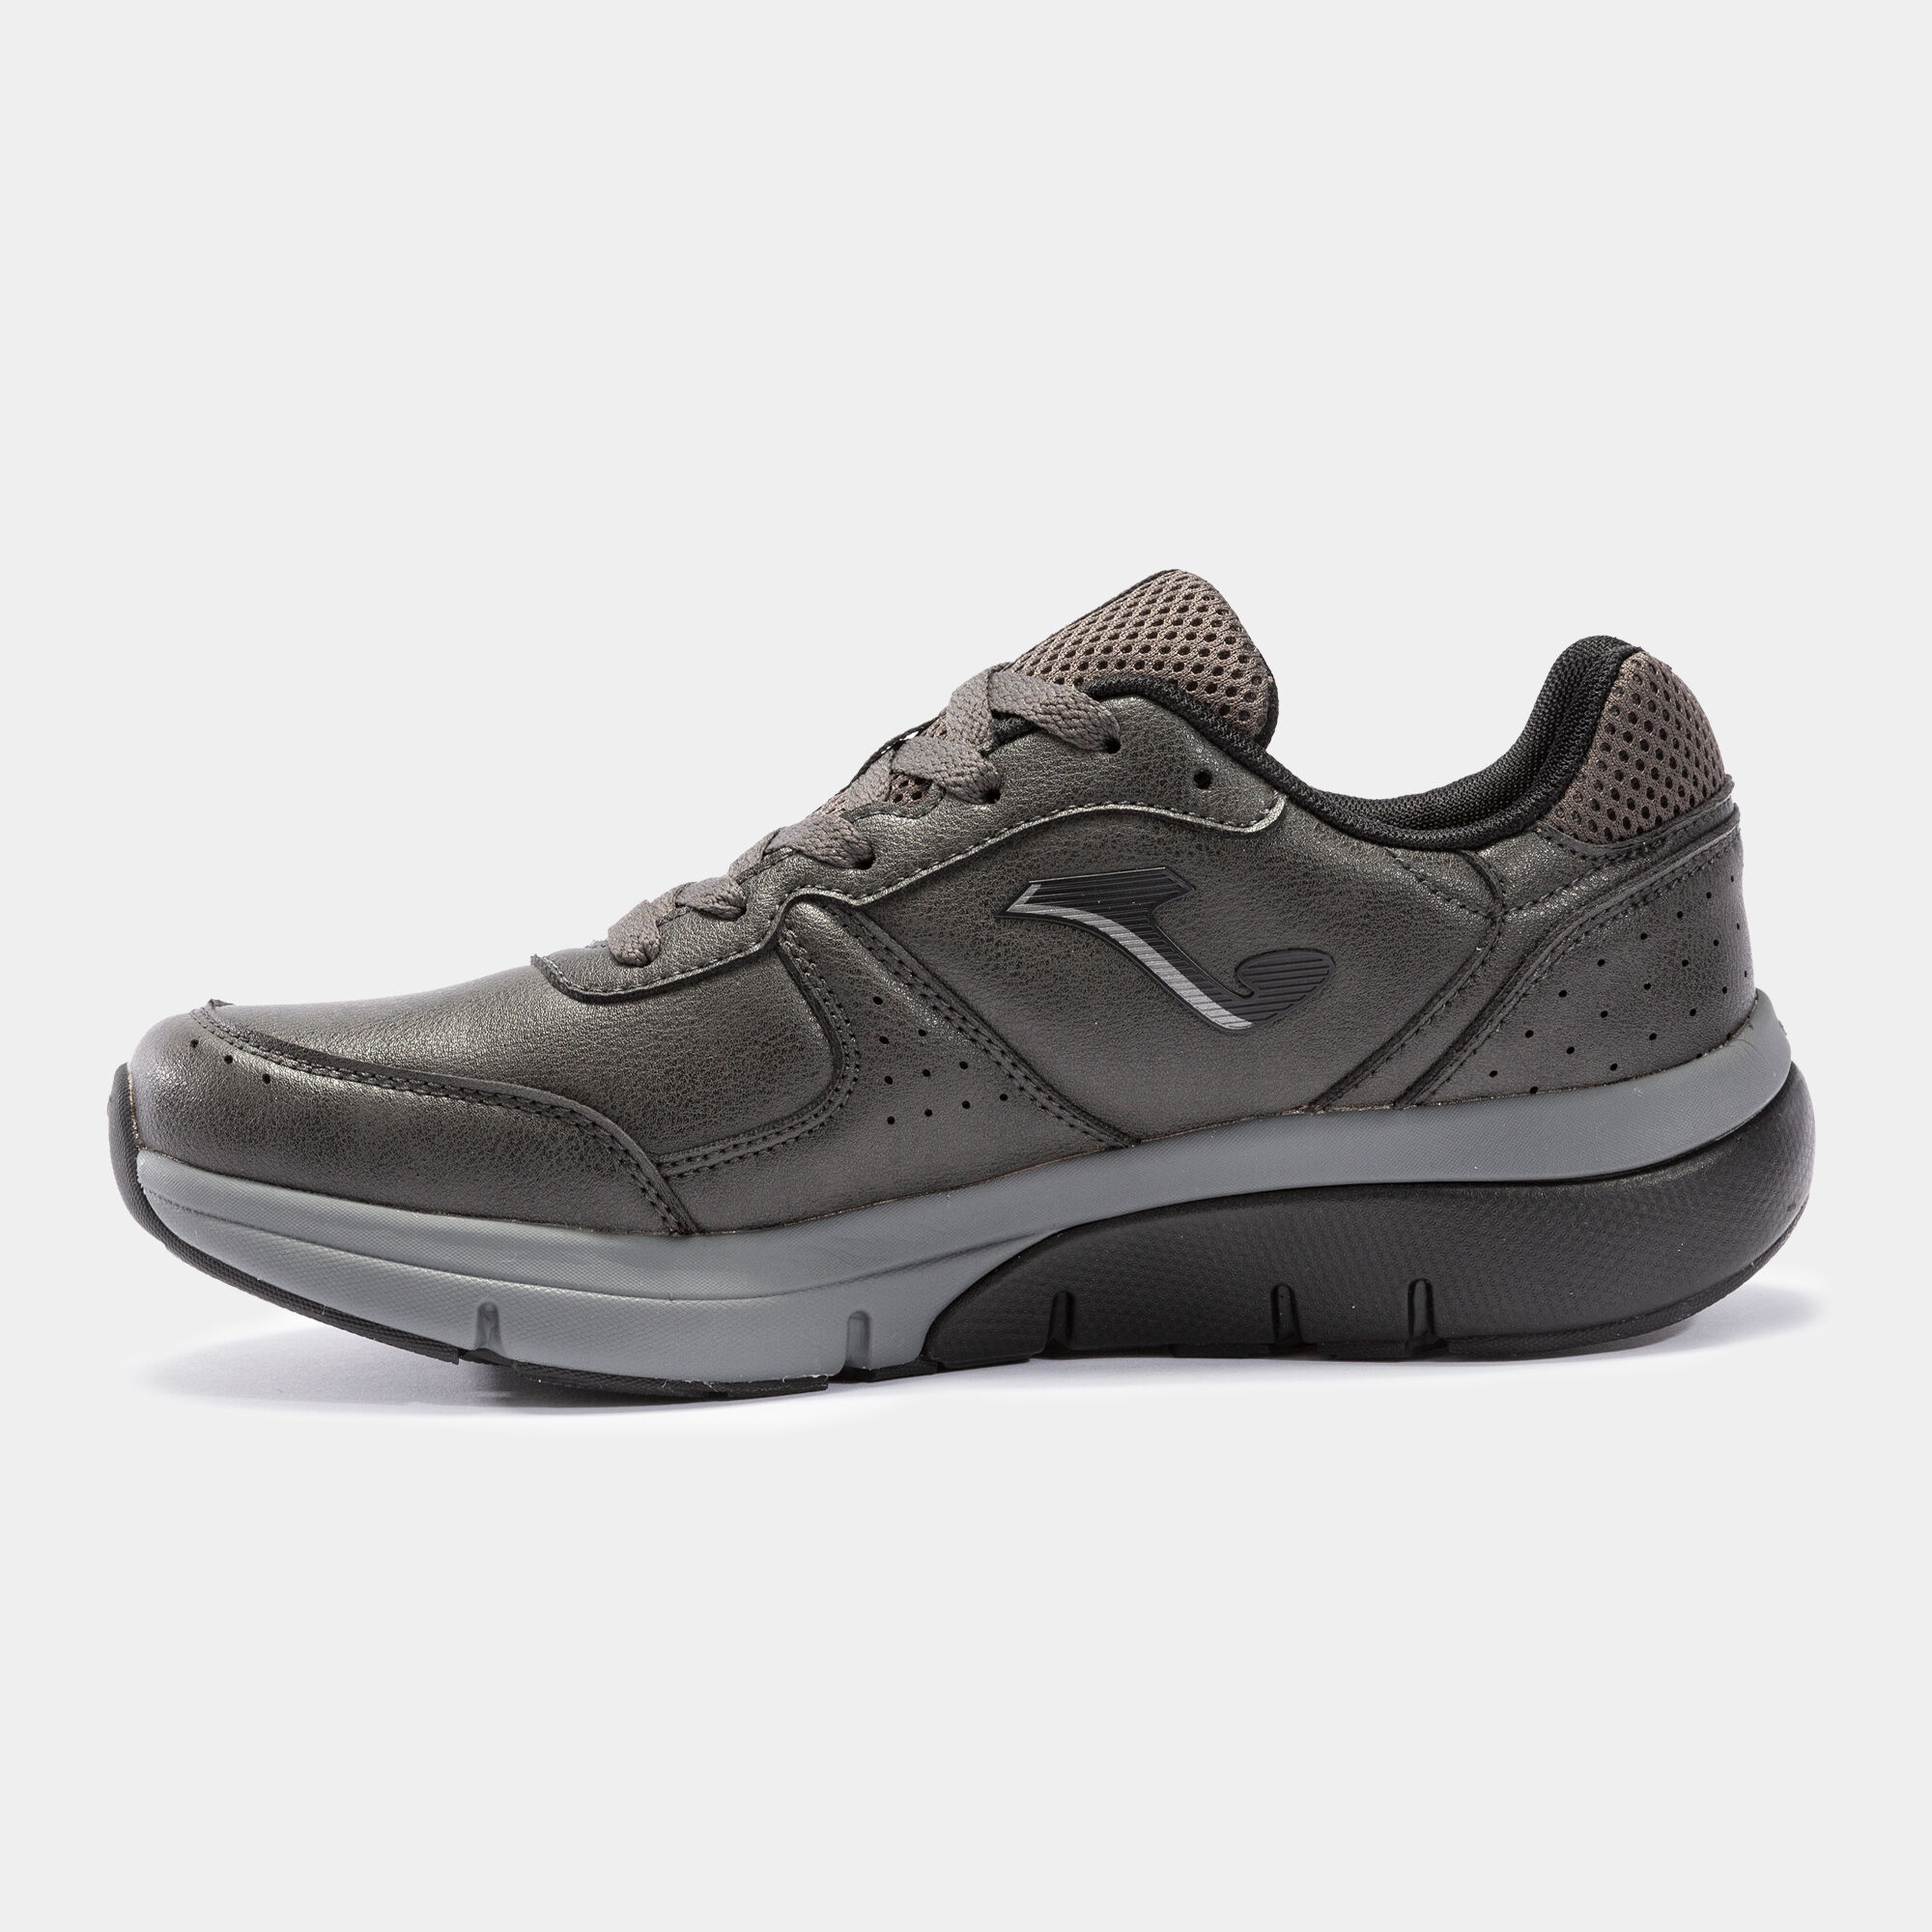 CHAUSSURES CASUAL YEN 22 HOMME GRIS